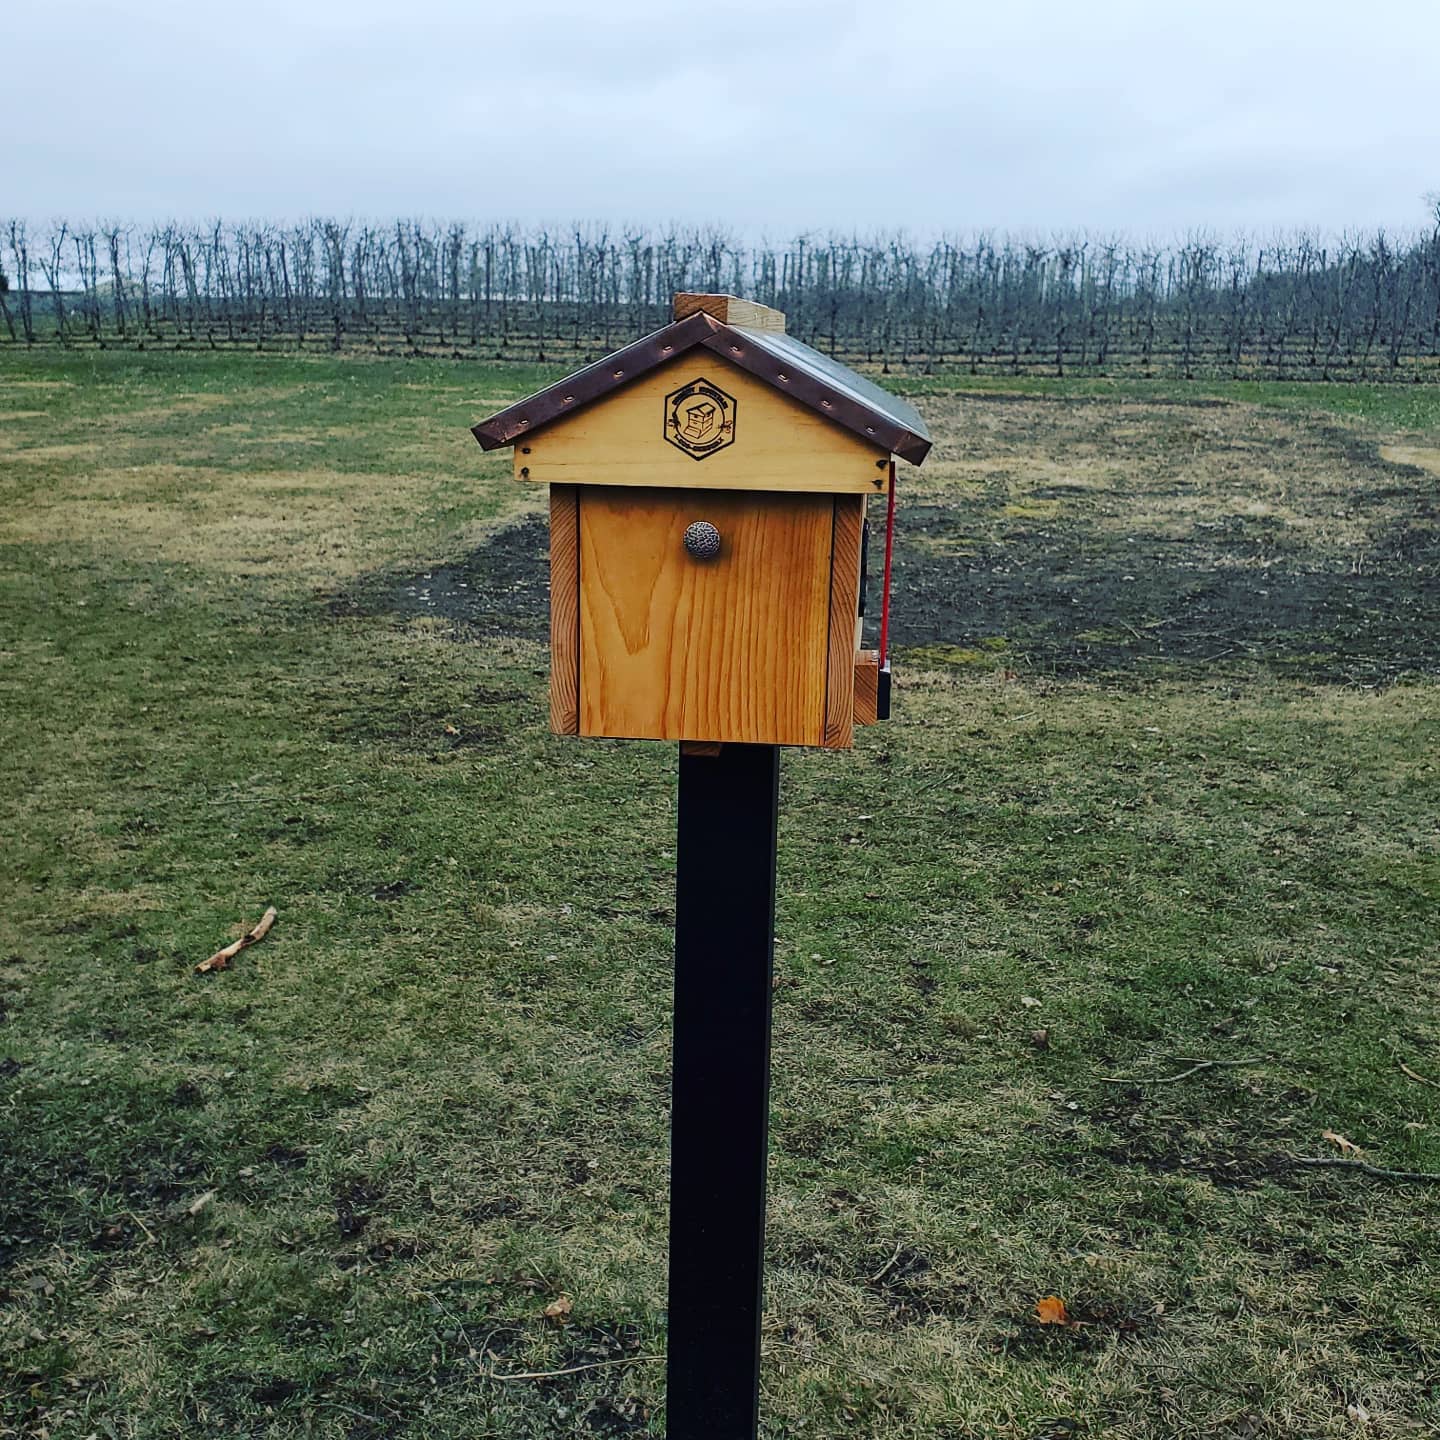 Today in order of what I felt the most to least competent doing: mailed gay things from the cutest apple orchard mailbox, walked along foggy rows of trees and held a toddler and a baby. Also: somehow the toddler has decided that my name is George. I'm okay with that.